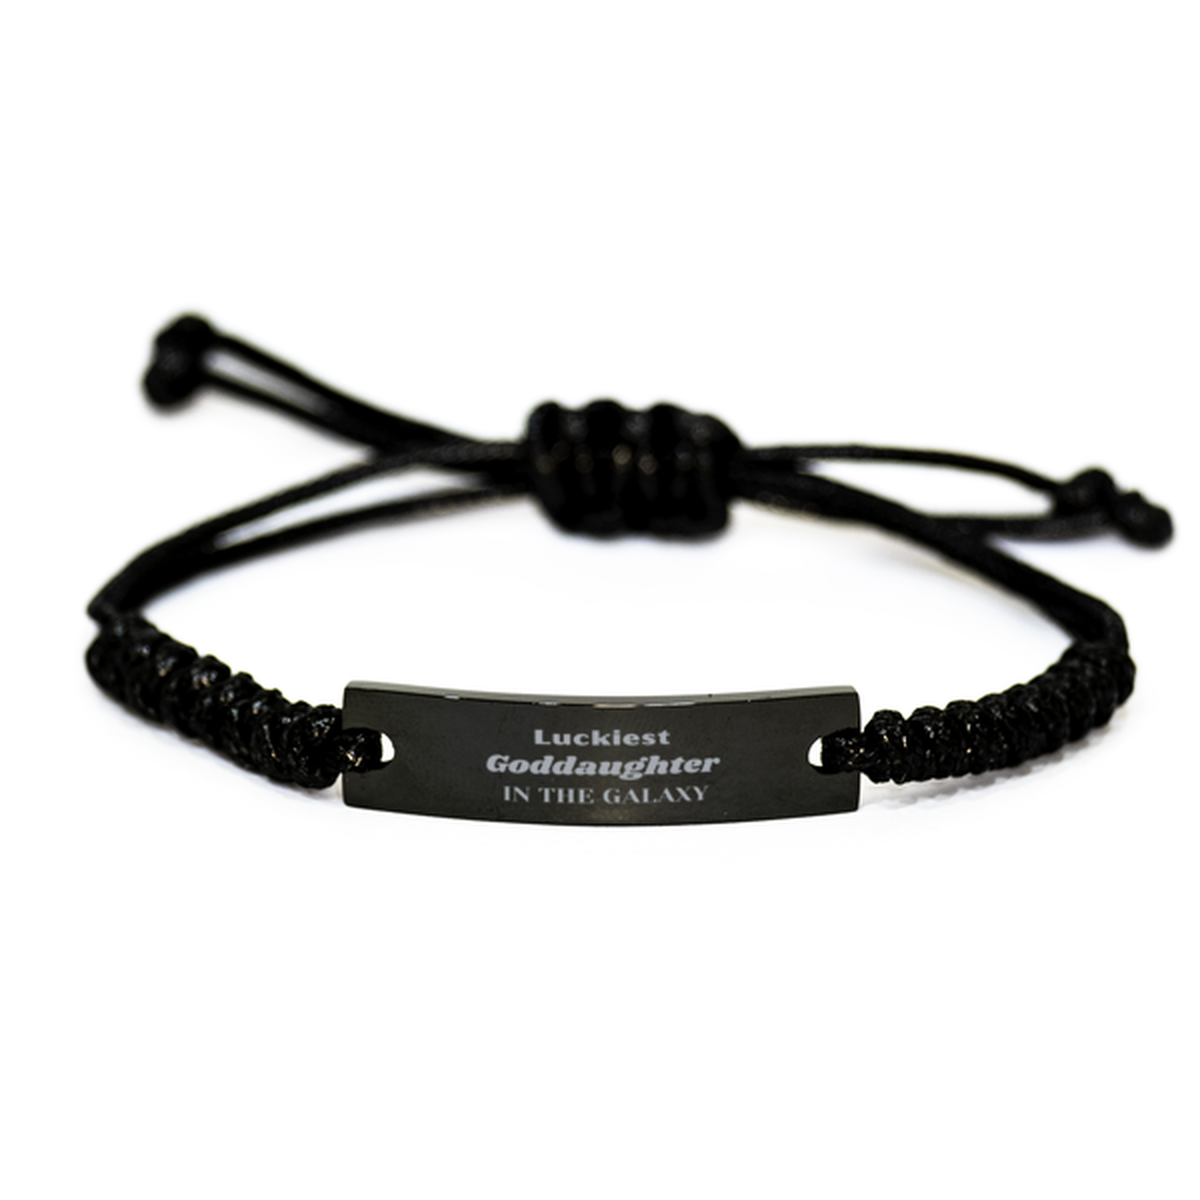 Luckiest Goddaughter in the Galaxy, To My Goddaughter Engraved Gifts, Christmas Goddaughter Black Rope Bracelet Gifts, X-mas Birthday Unique Gifts For Goddaughter Men Women